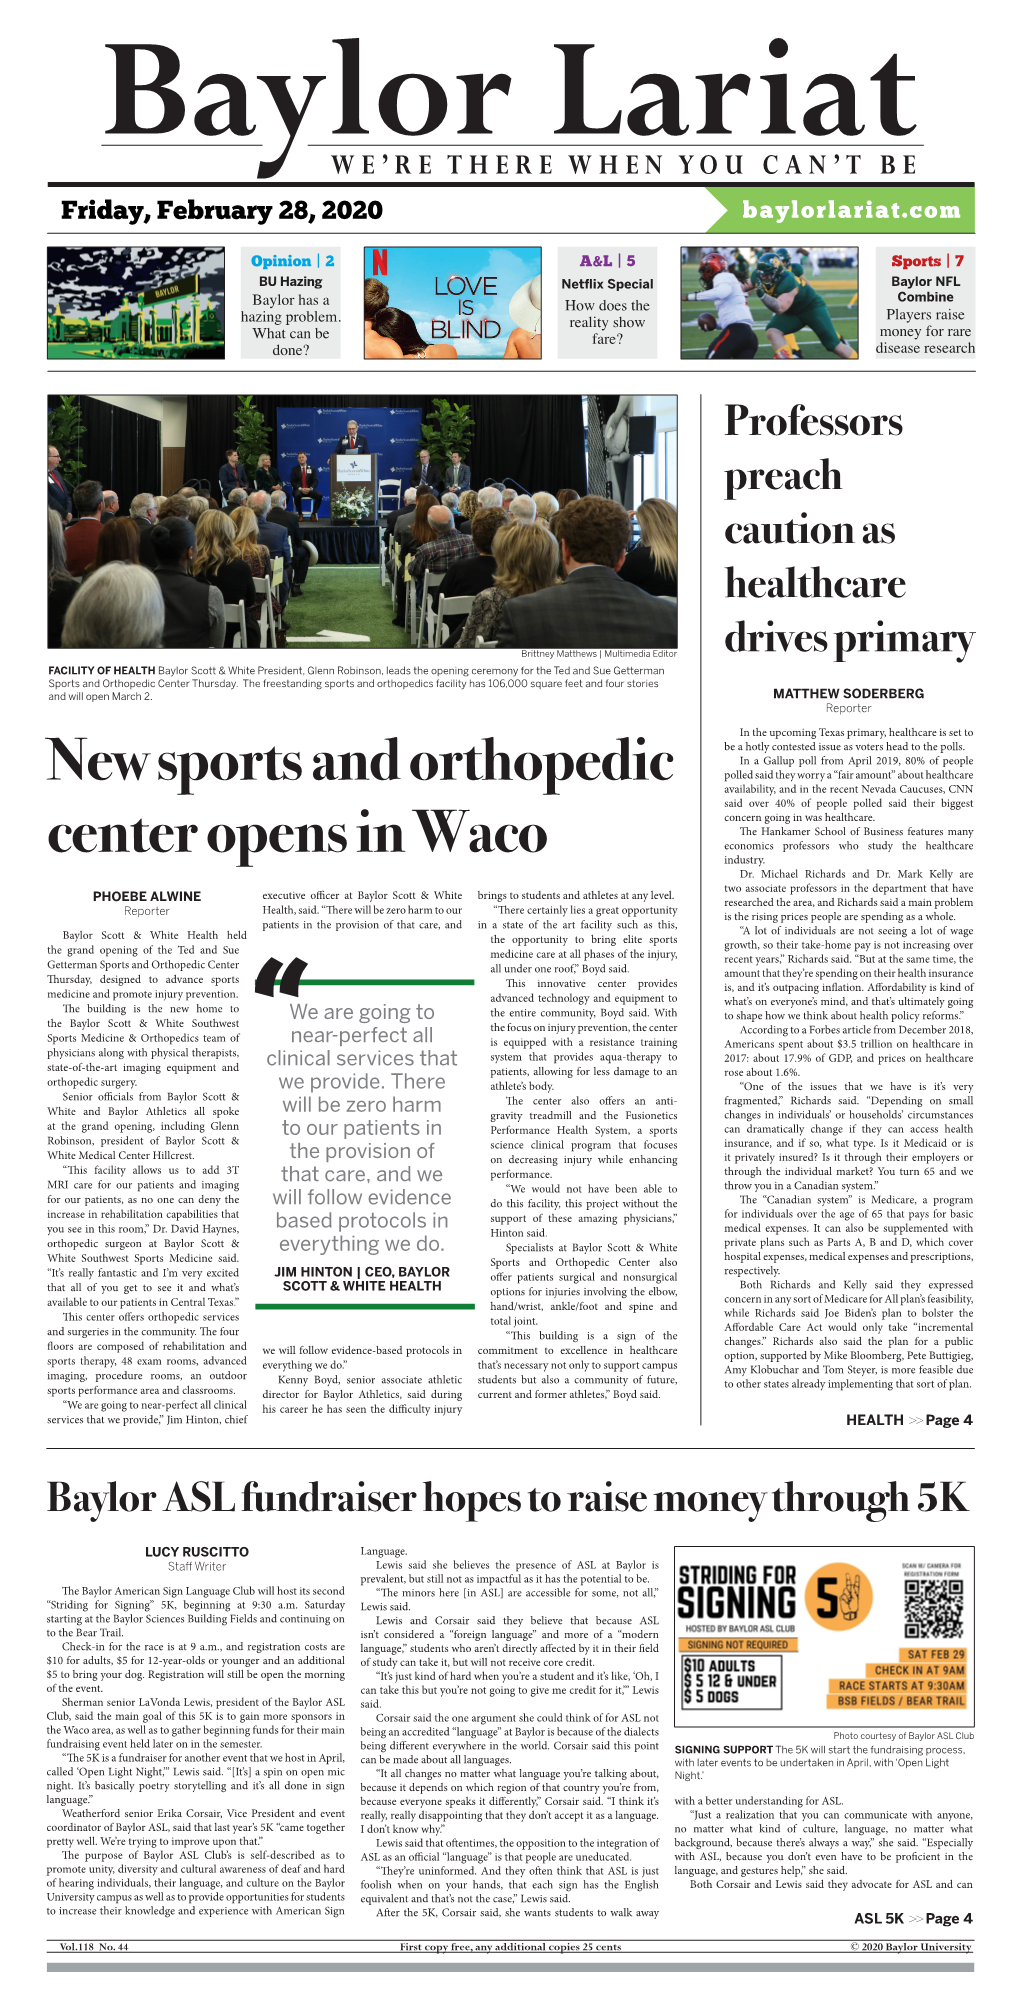 New Sports and Orthopedic Center Opens in Waco